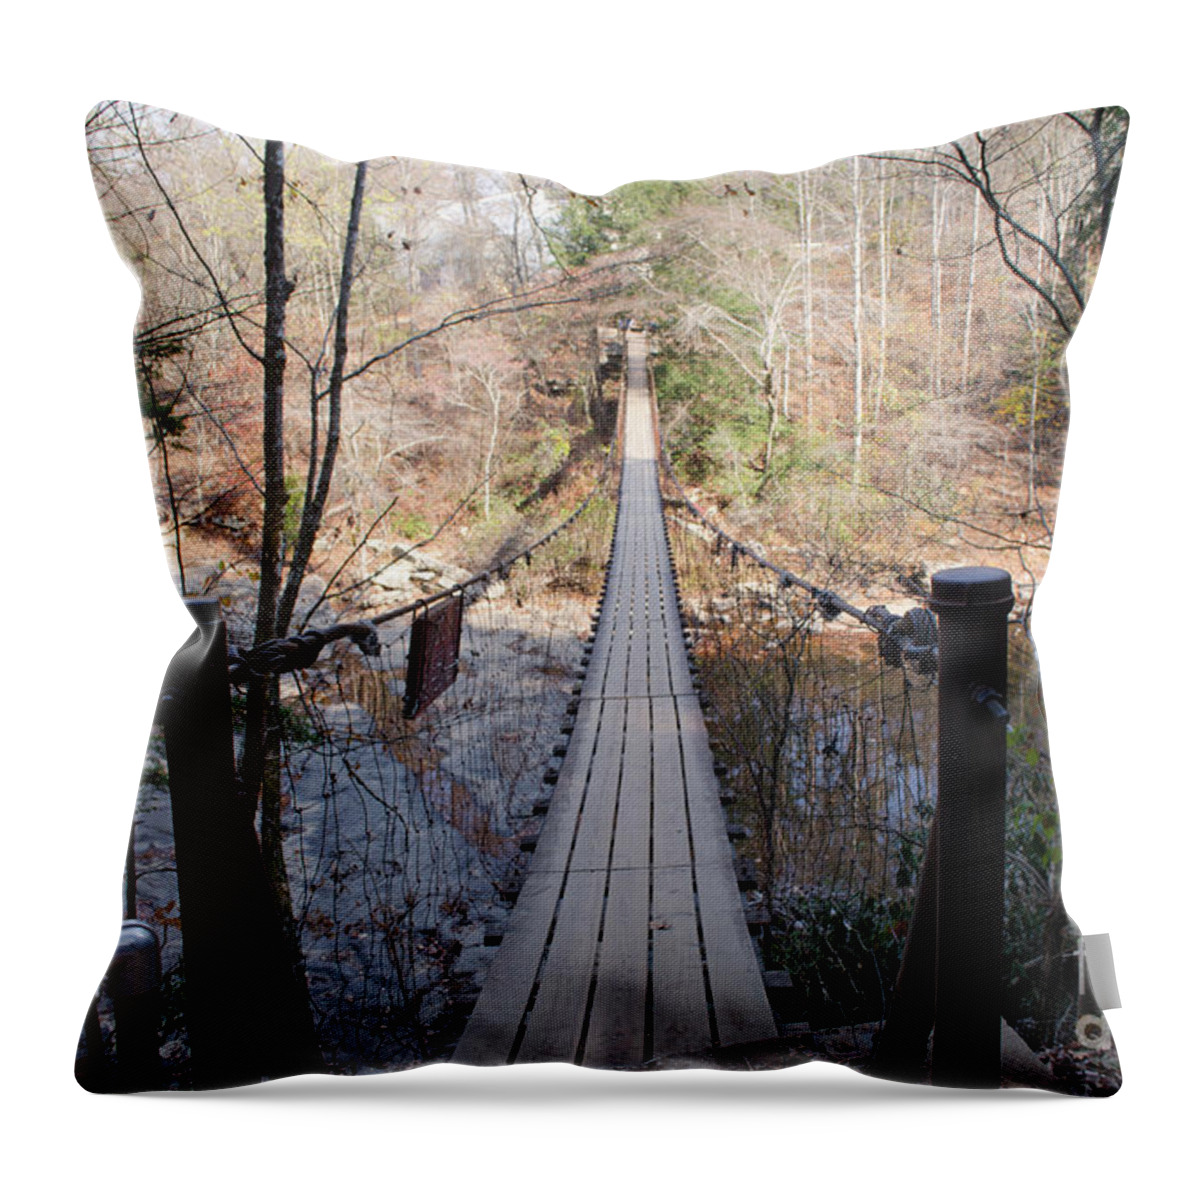 Bridge Throw Pillow featuring the photograph Suspension Bridge At Fall Creek Falls State Park by Donna Brown